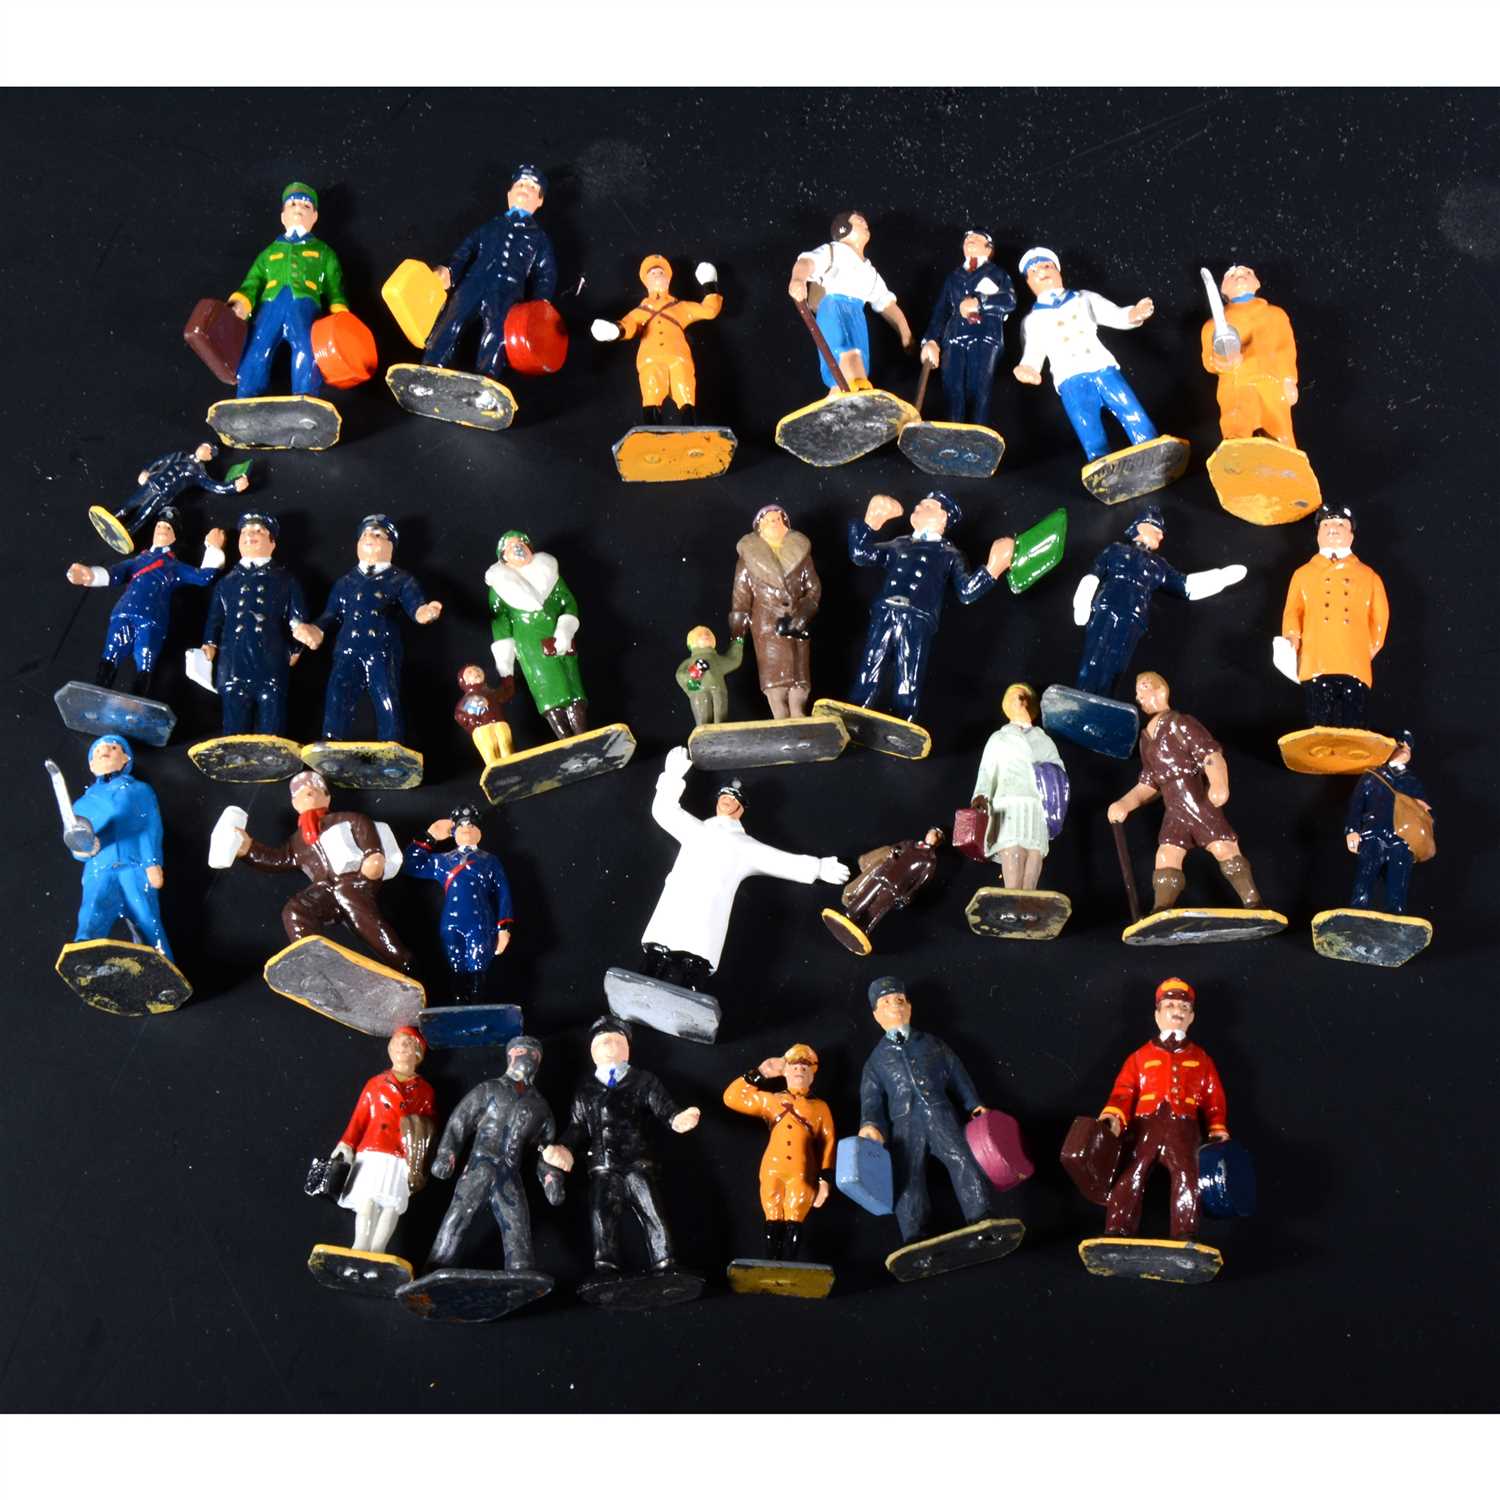 Lot 456 - A set of twenty eight metal railway figures, cast from Frank Hornbys' original moulds cast and hand painted by Somerville models, painted.